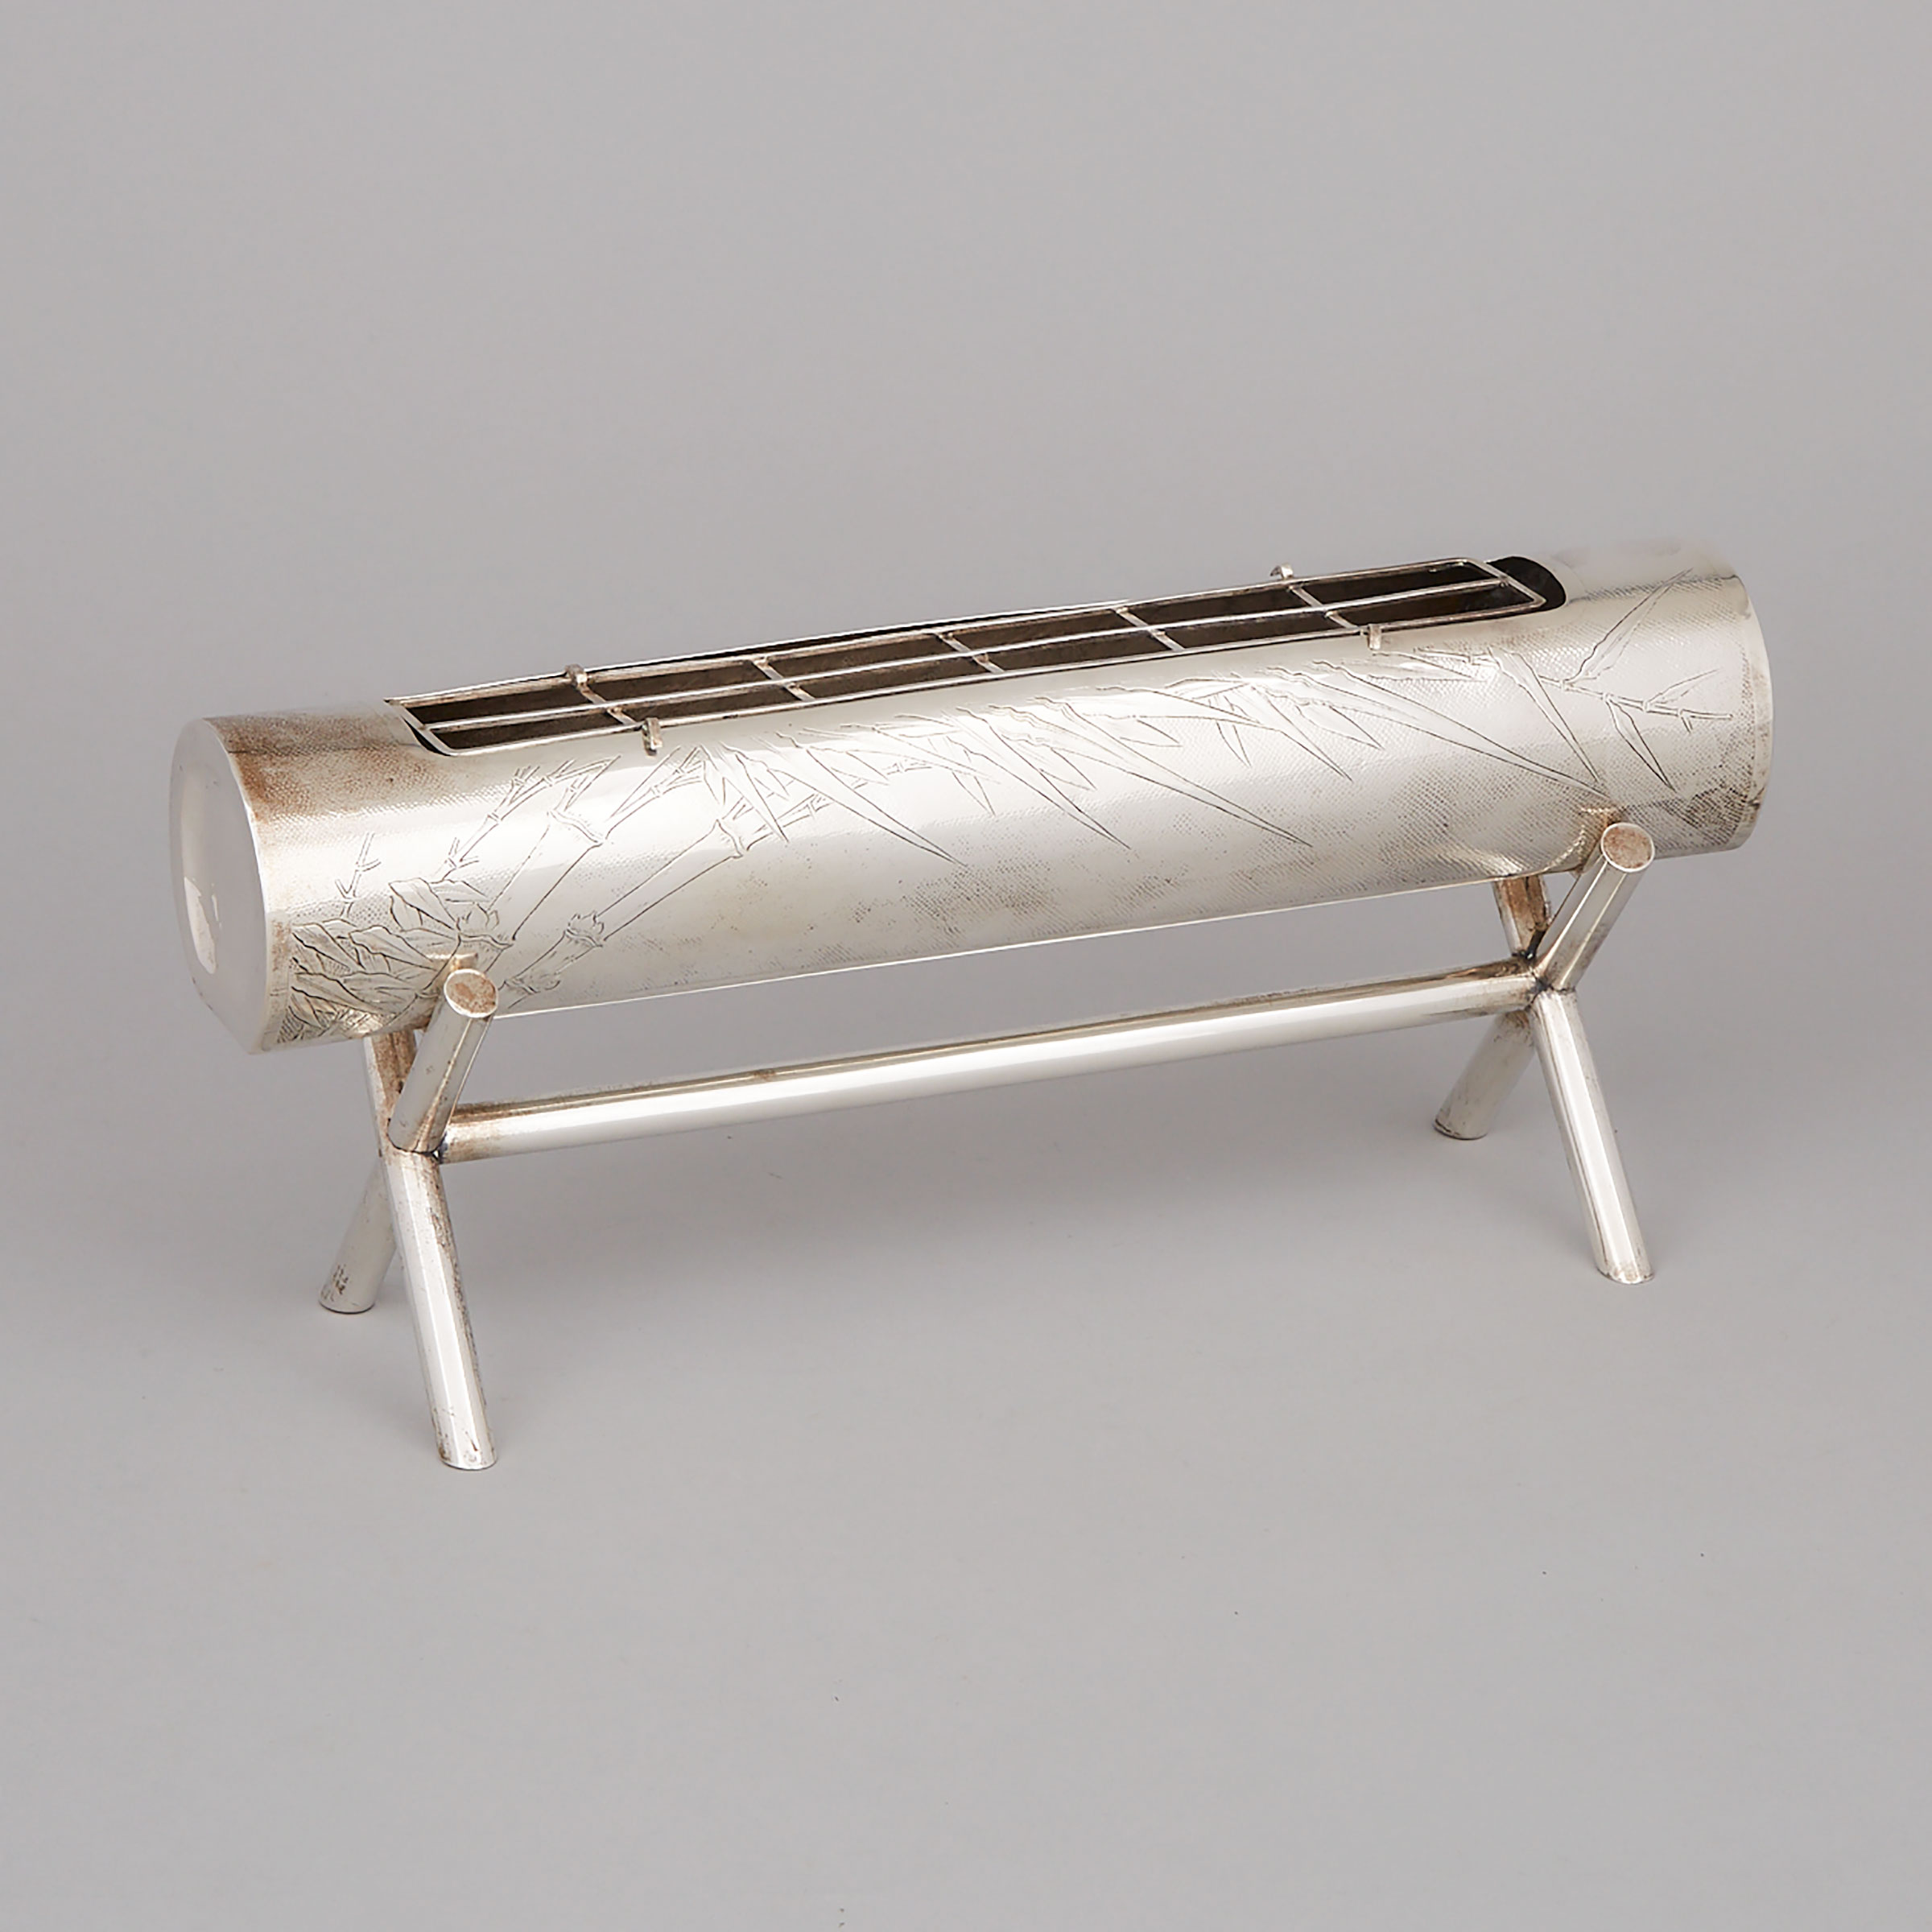 Chinese Silver Bamboo Log Vase and Stand, 20th century